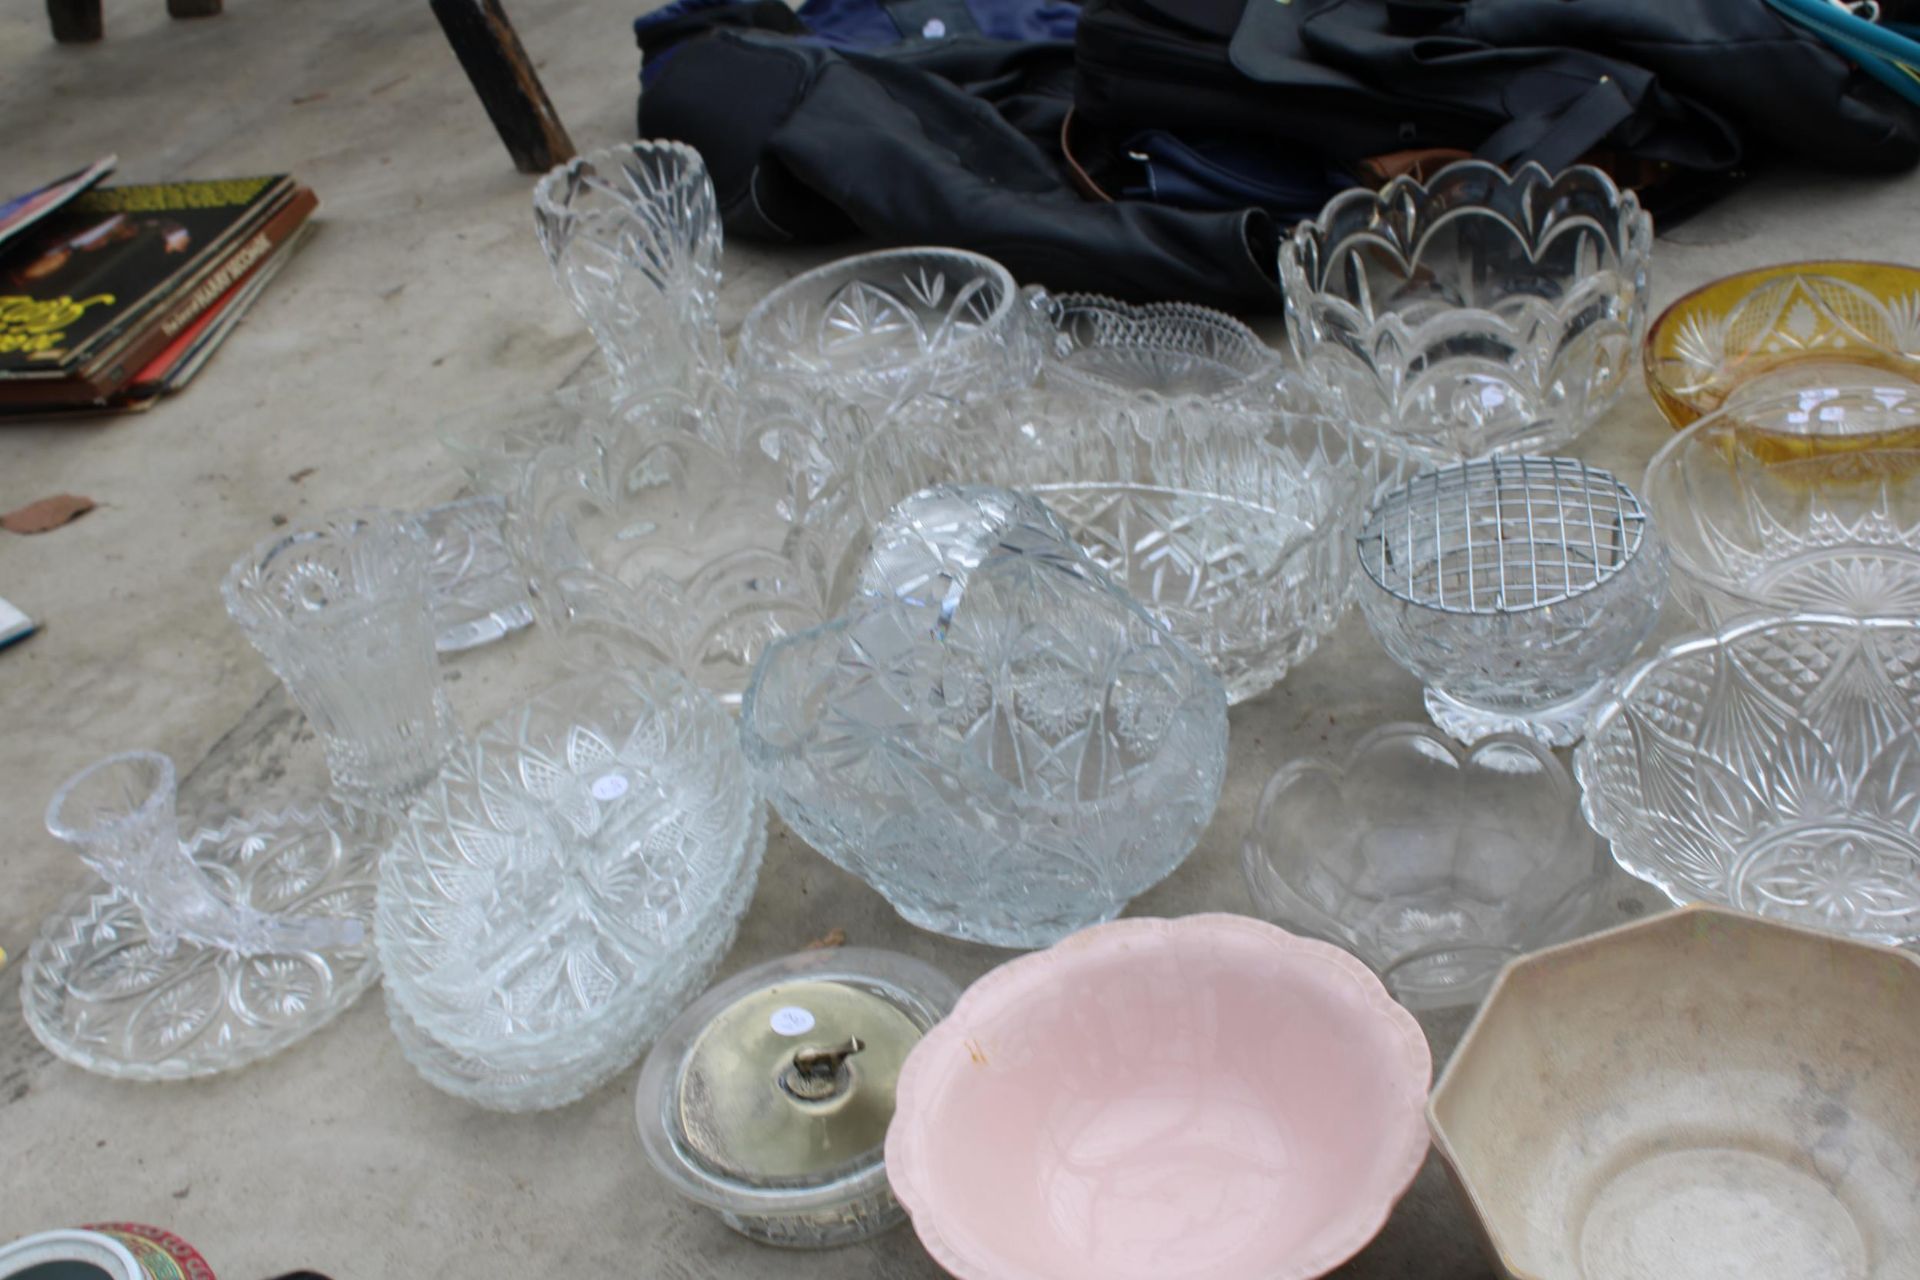 A LARGE ASSORTMENT OF GLASS WARE AND CERAMICS TO INCLUDE BOWLS, VASES AND POSSIE BASKETS ETC - Image 2 of 2